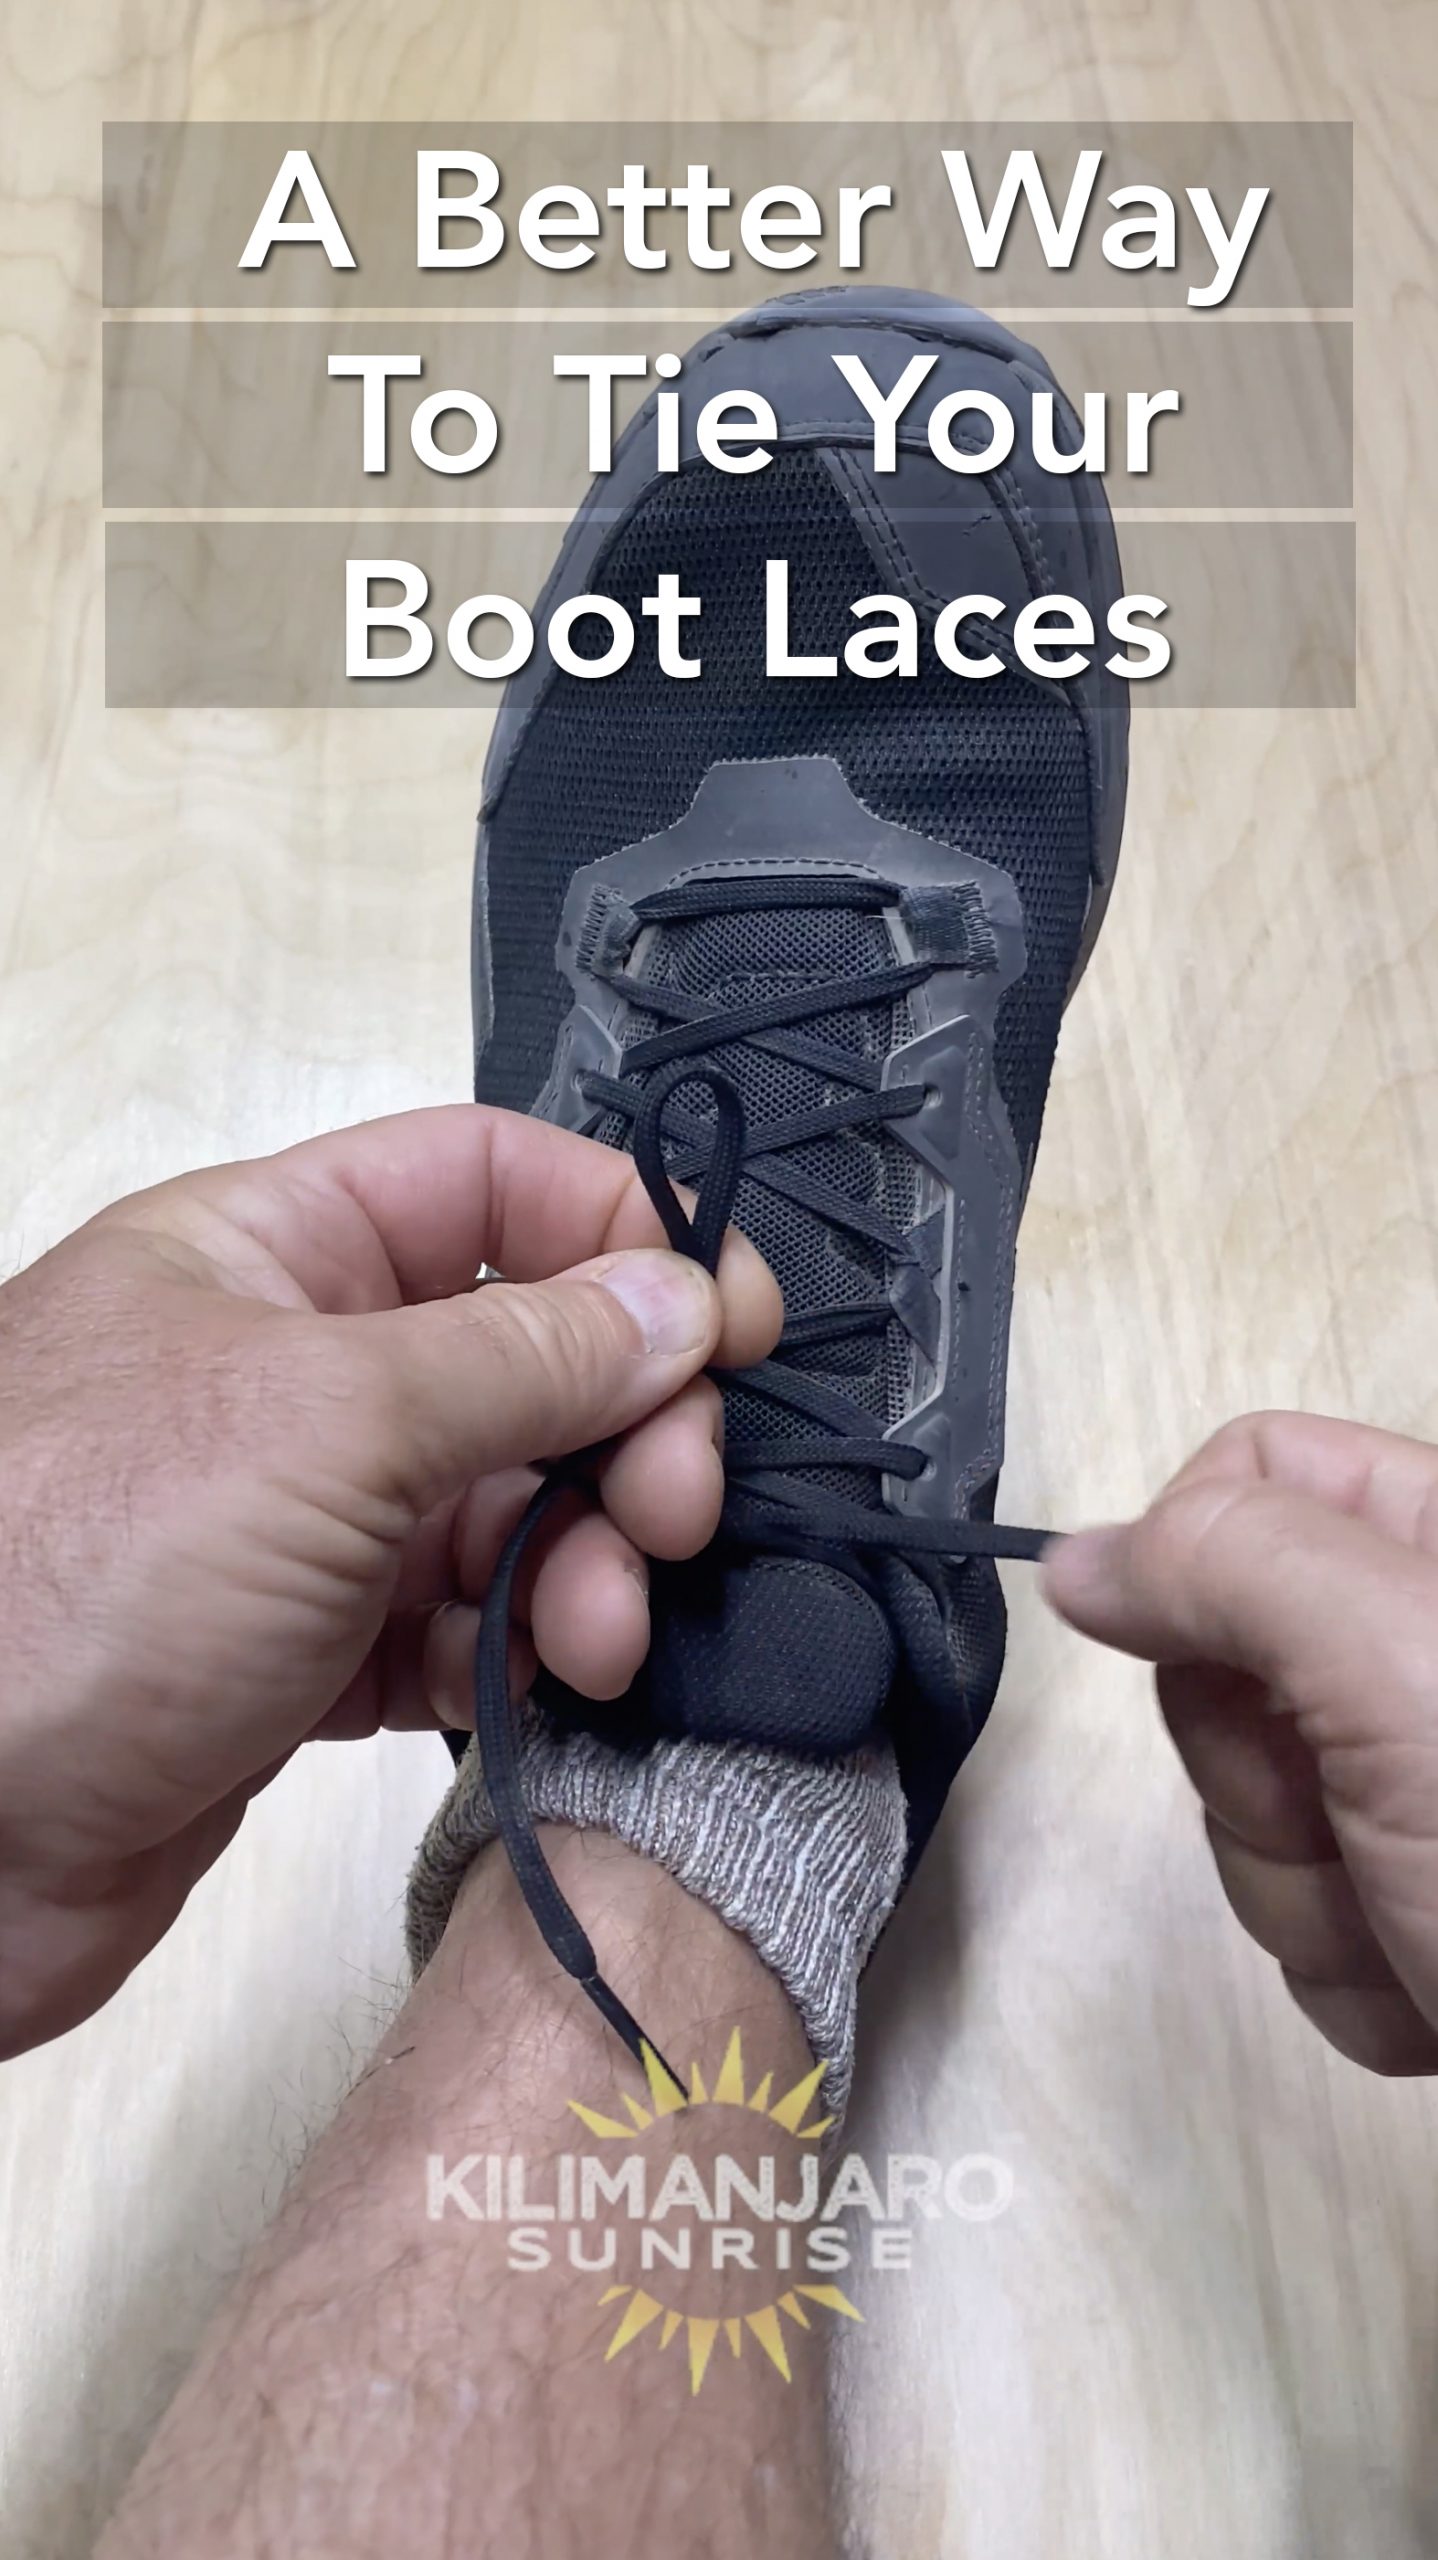 Better way to tie your laces